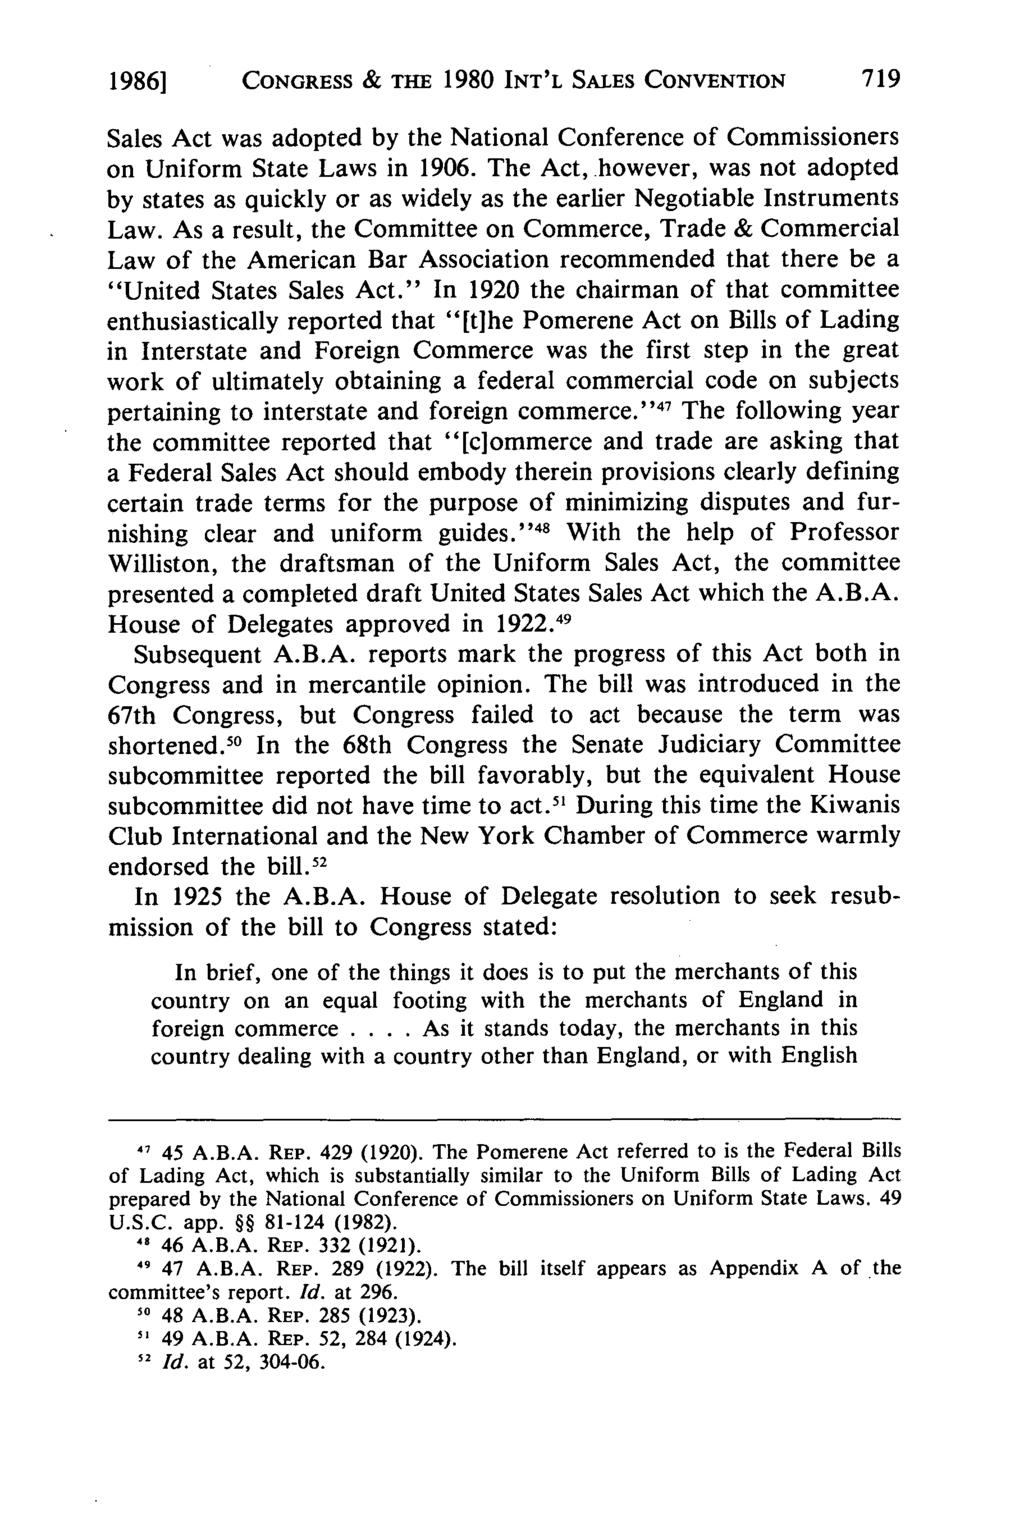 1986] CONGRESS & THE 1980 INT'L SALES CONVENTION Sales Act was adopted by the National Conference of Commissioners on Uniform State Laws in 1906.